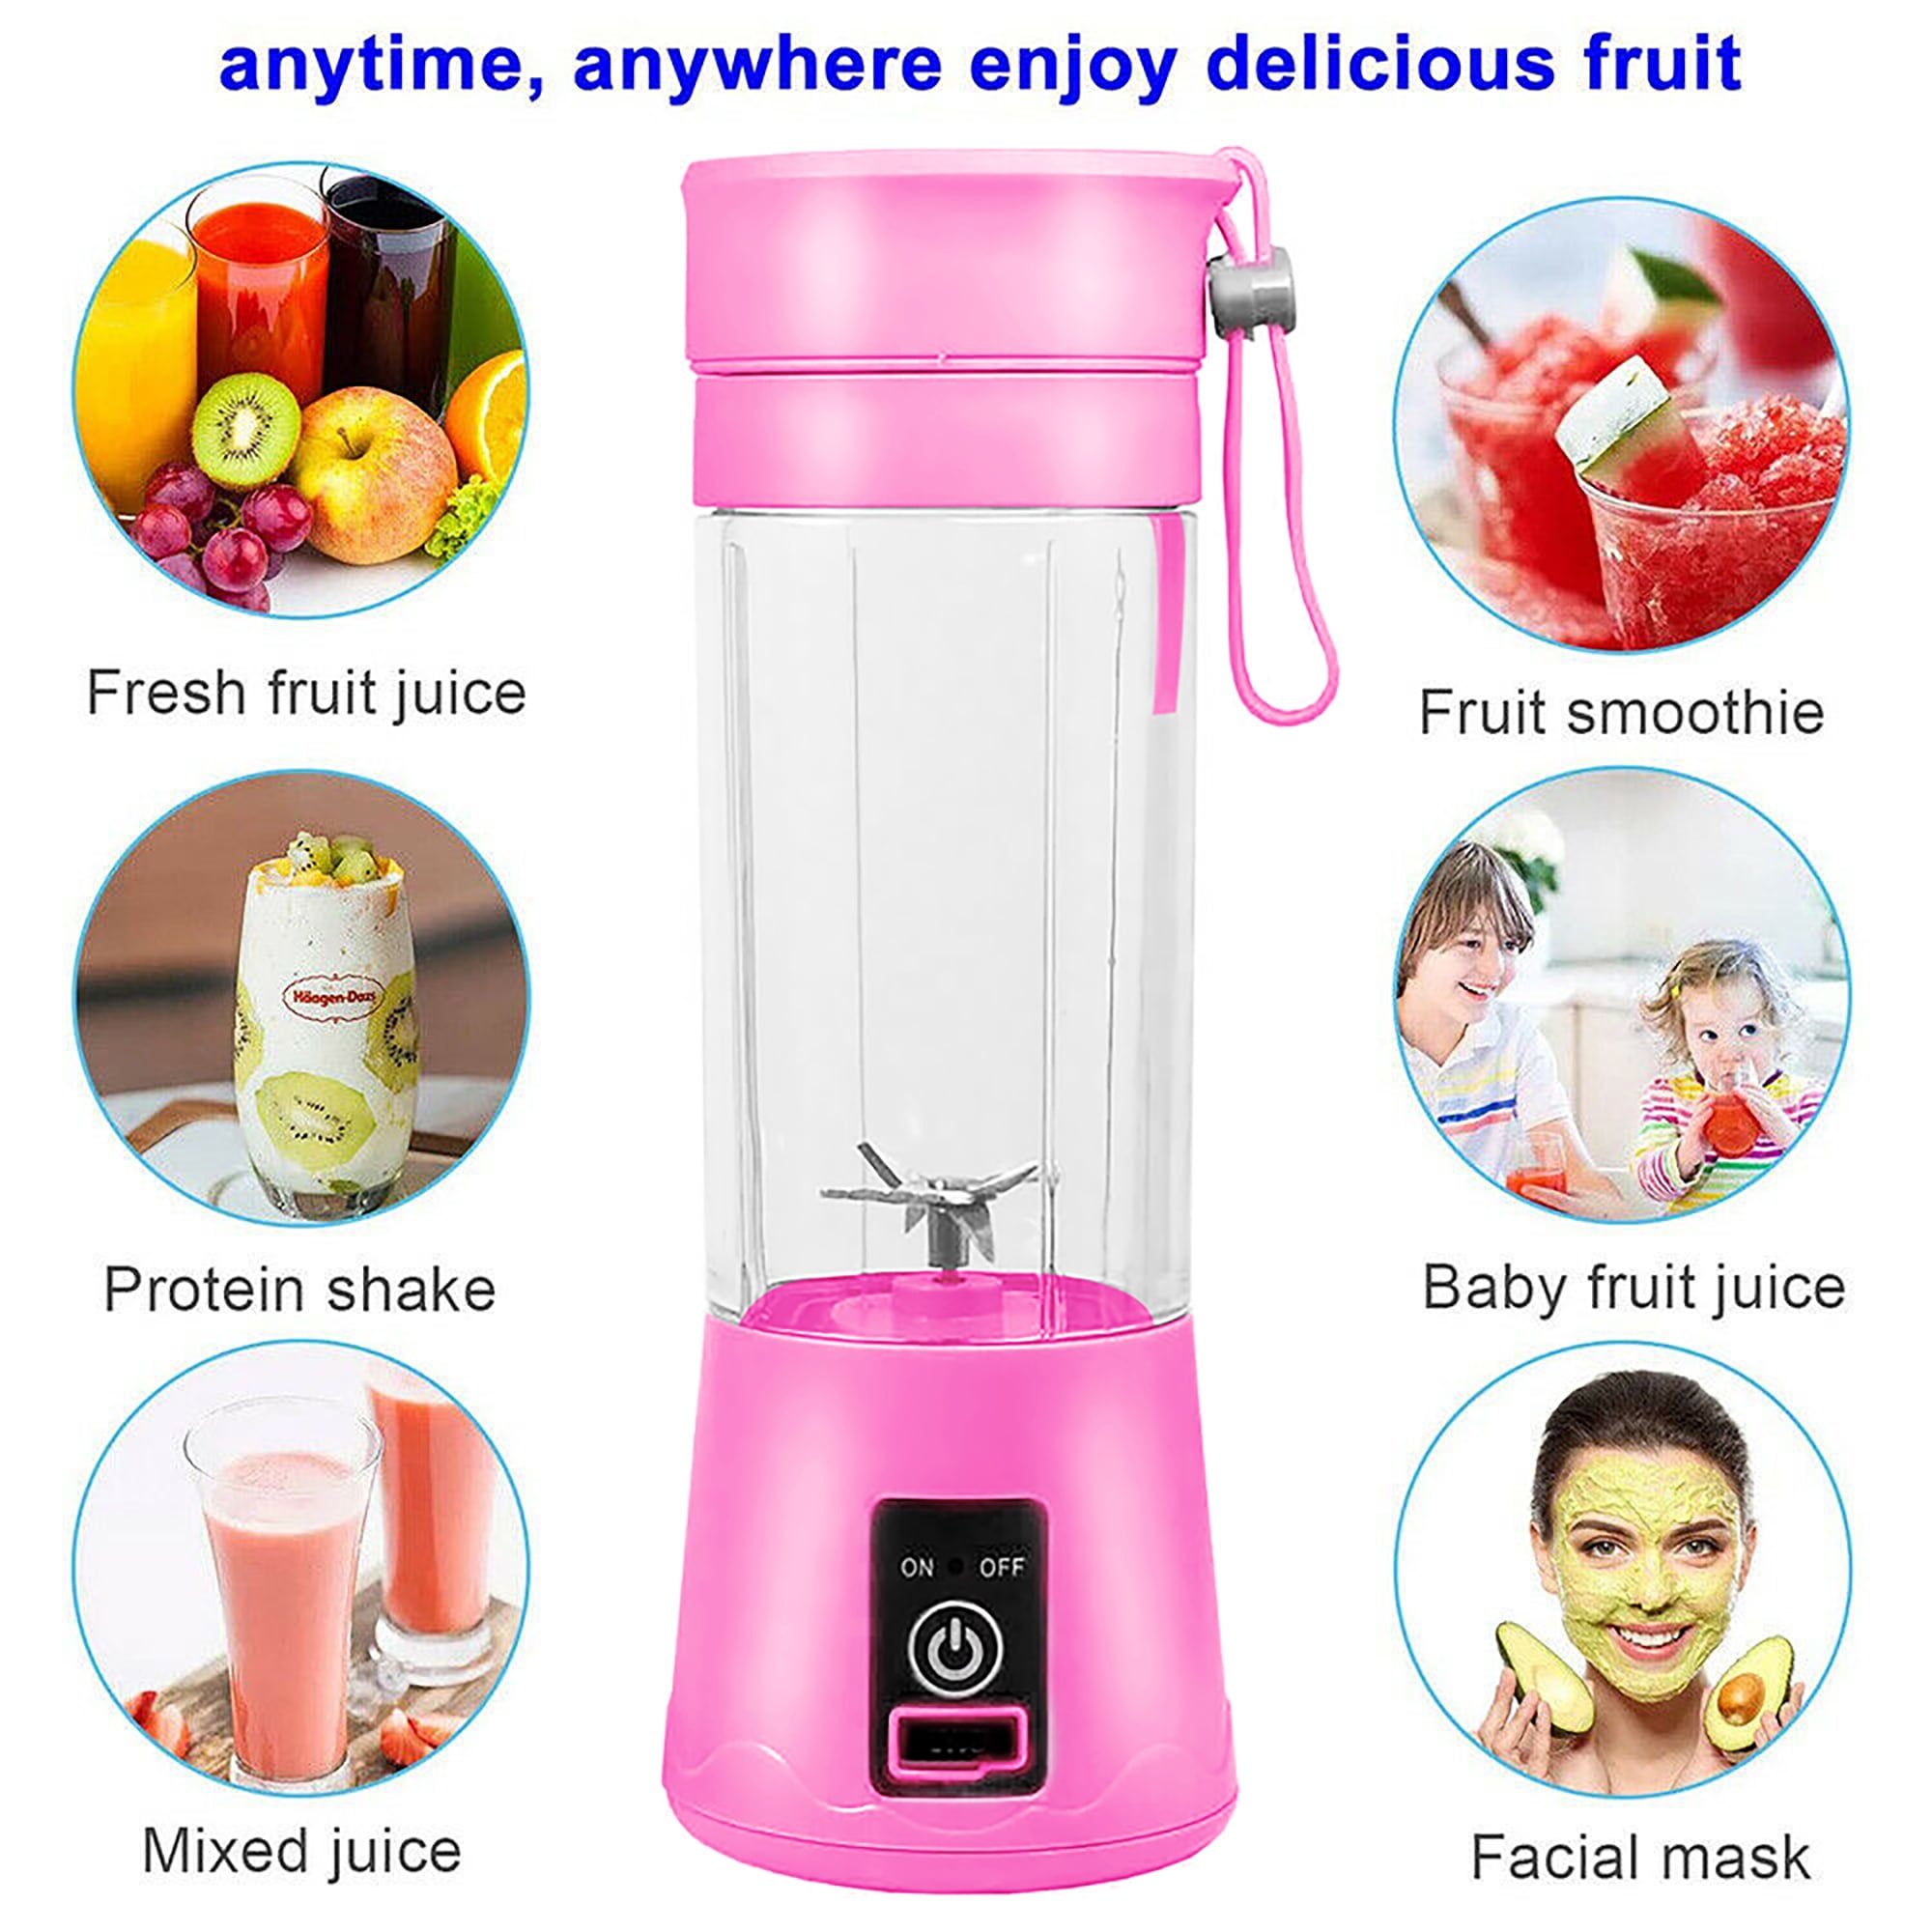 BlendShark 9.5 Choice of Color Portable Blender w/ Cleaning Wand